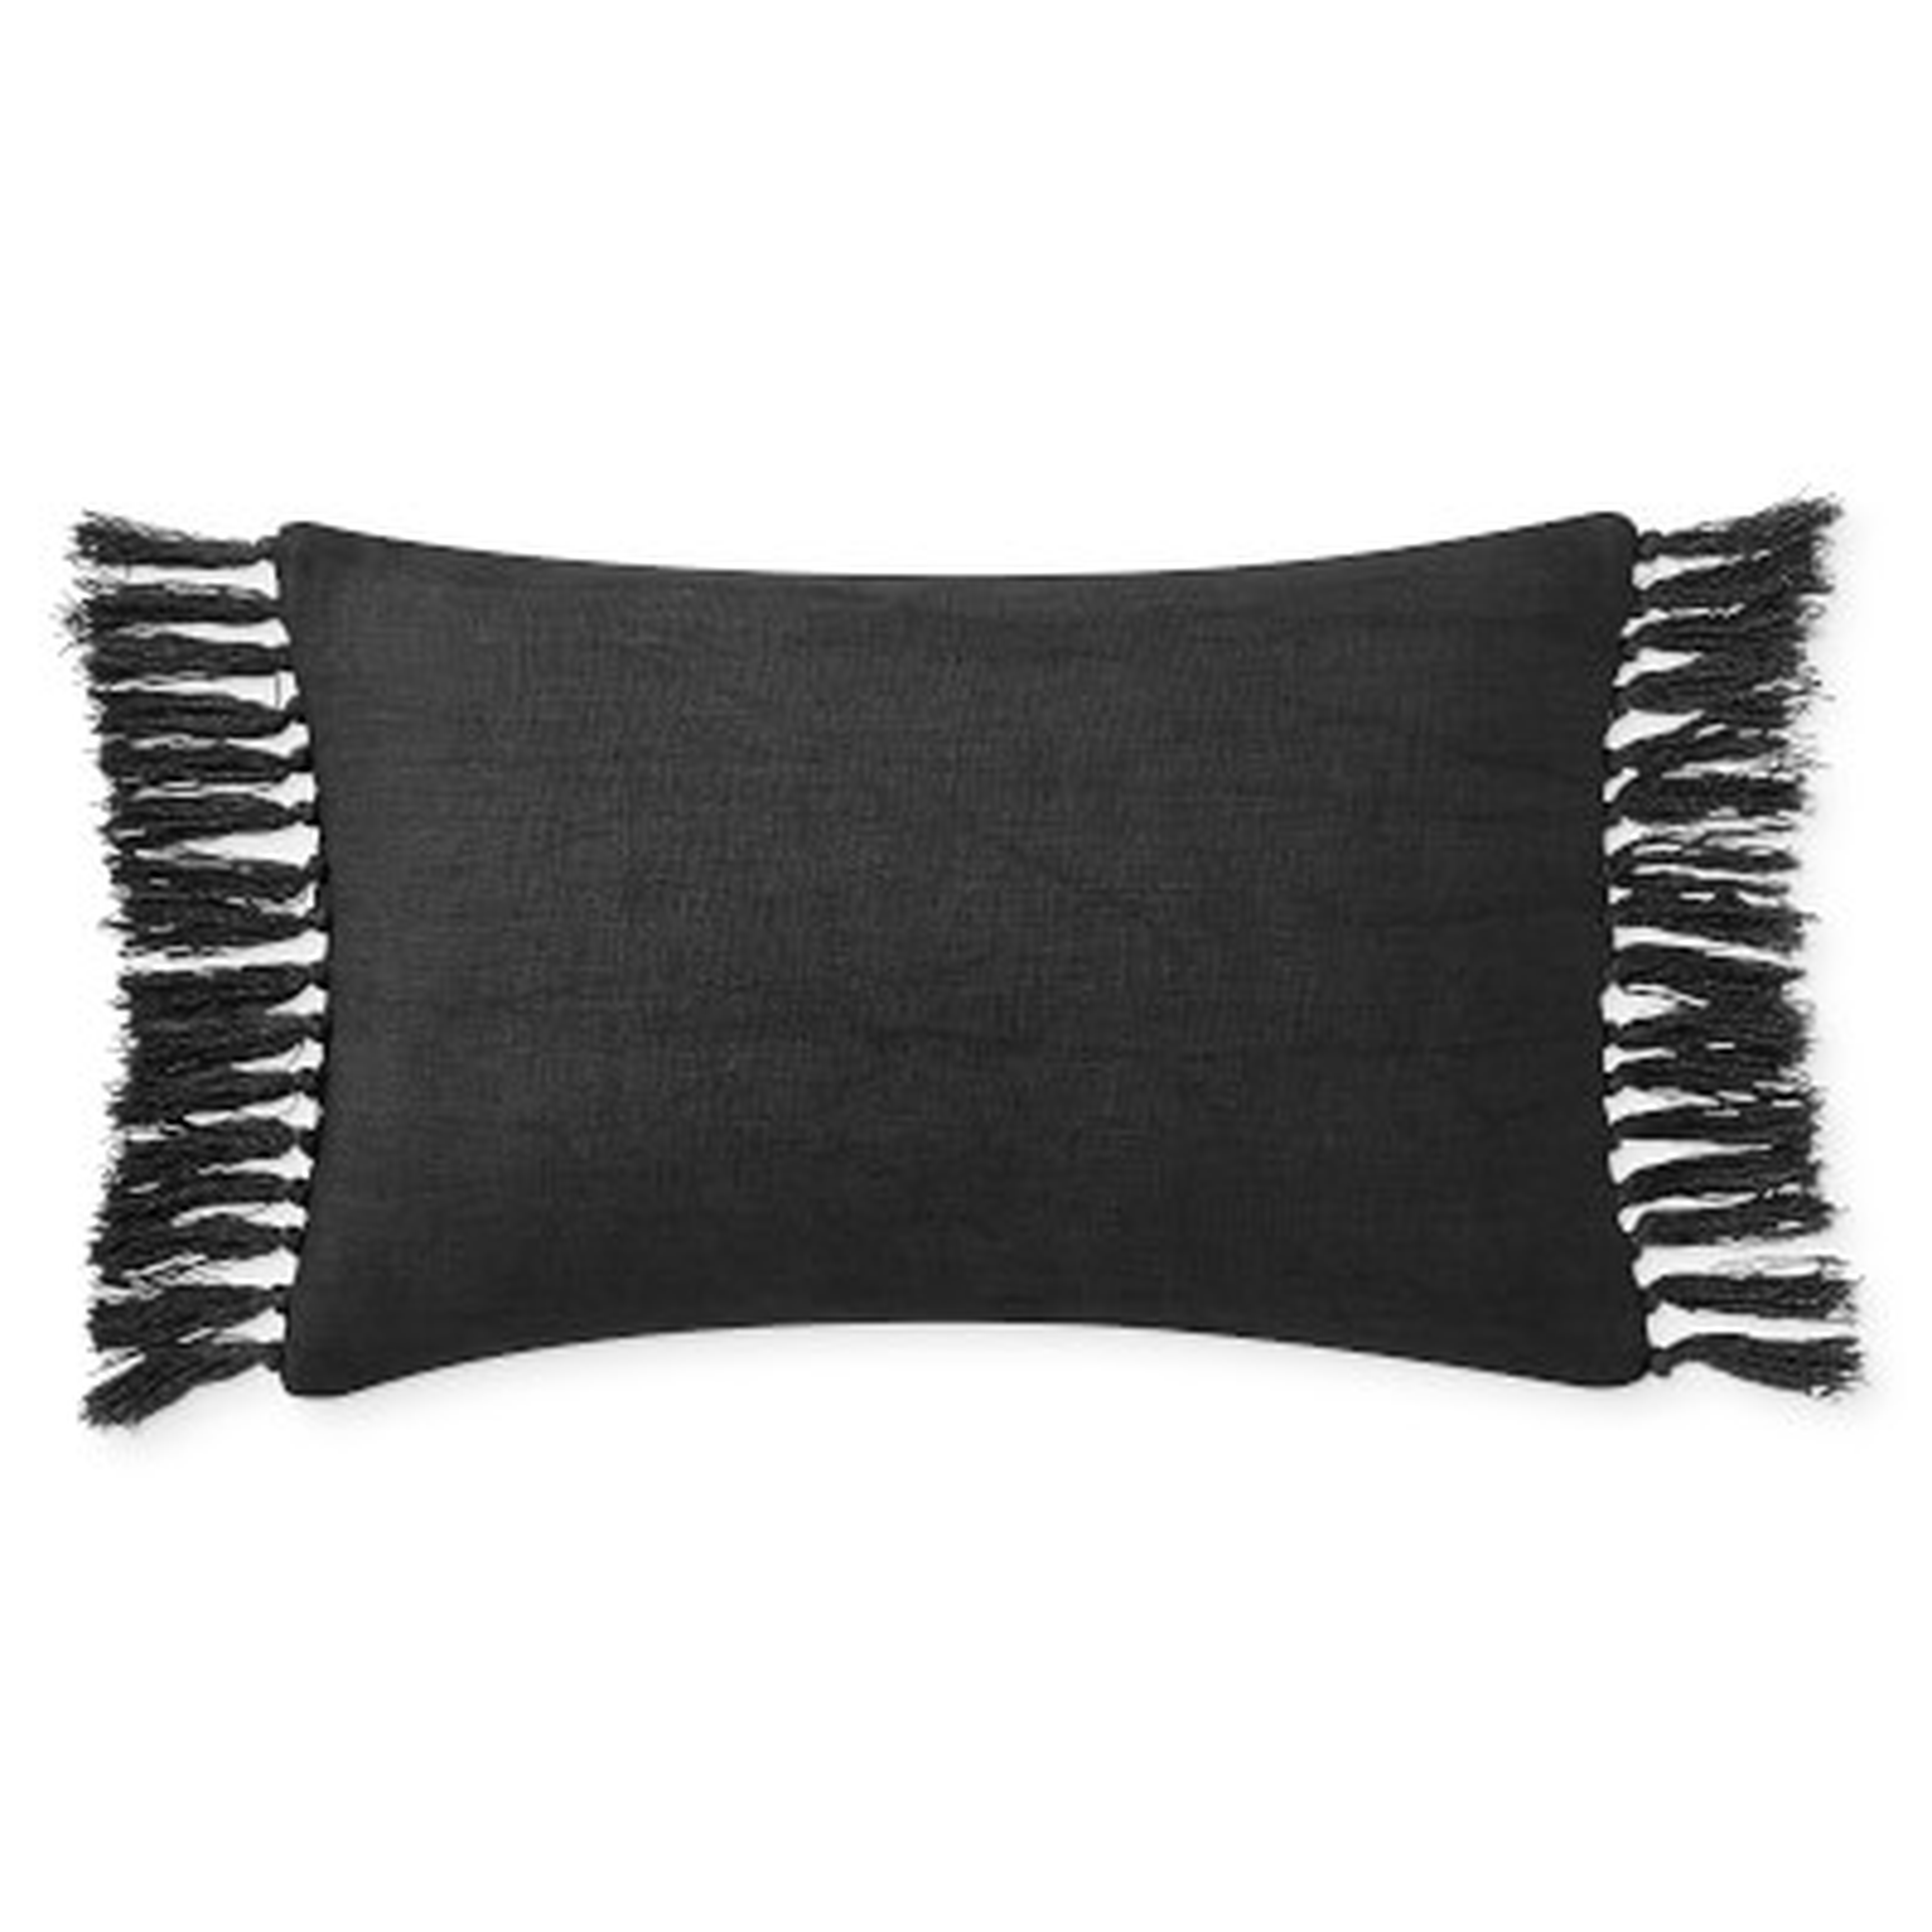 Knotted Fringe Linen Lumbar Pillow Cover, 14" X 22", Black - Williams Sonoma